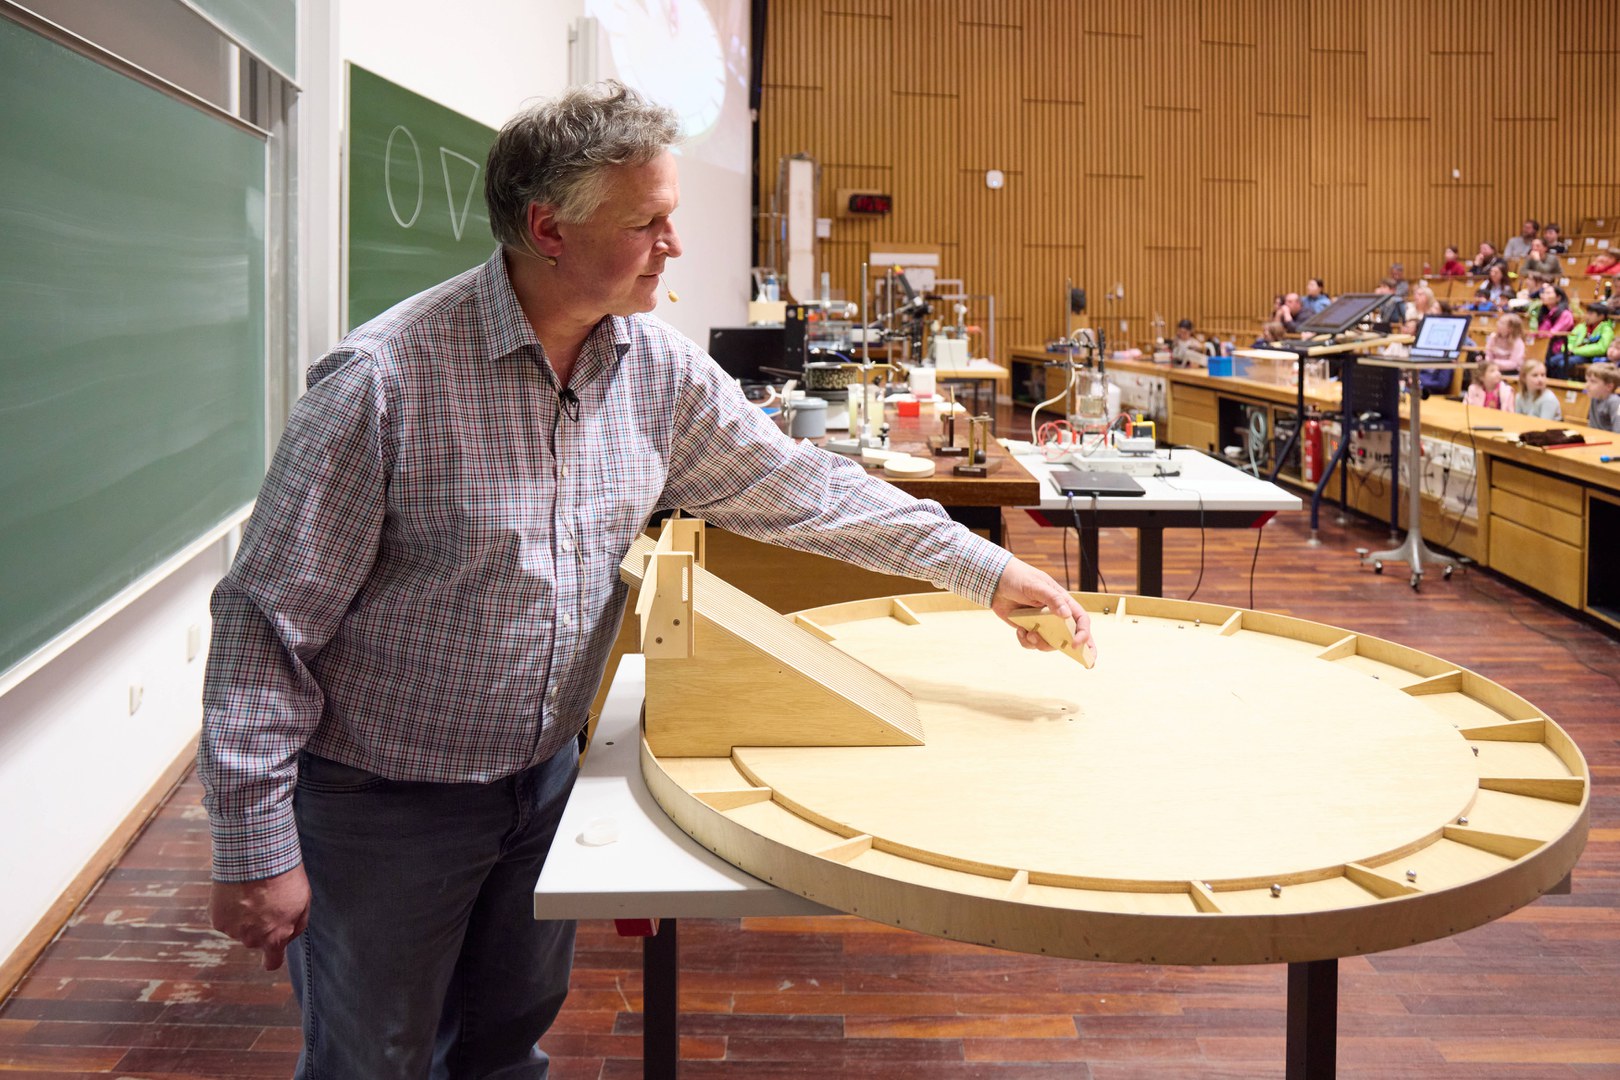 Prof. Desch positions a wooden body in the middle of a scattering board.